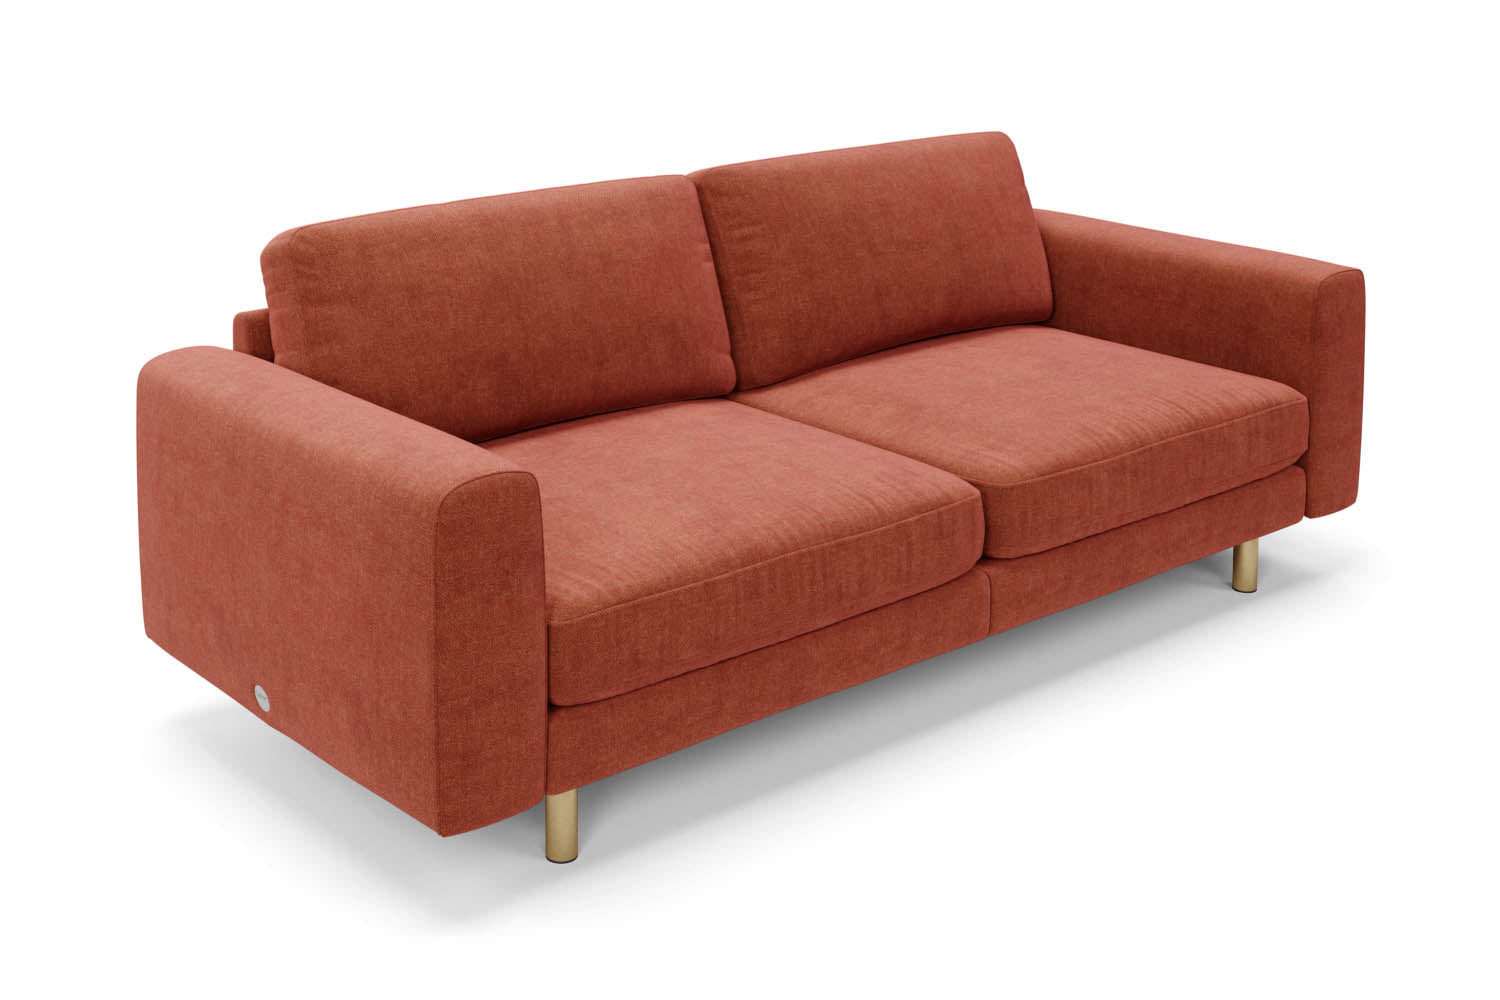 The Big Chill 3 Seater Sofa in Spice Chenille with metal legs